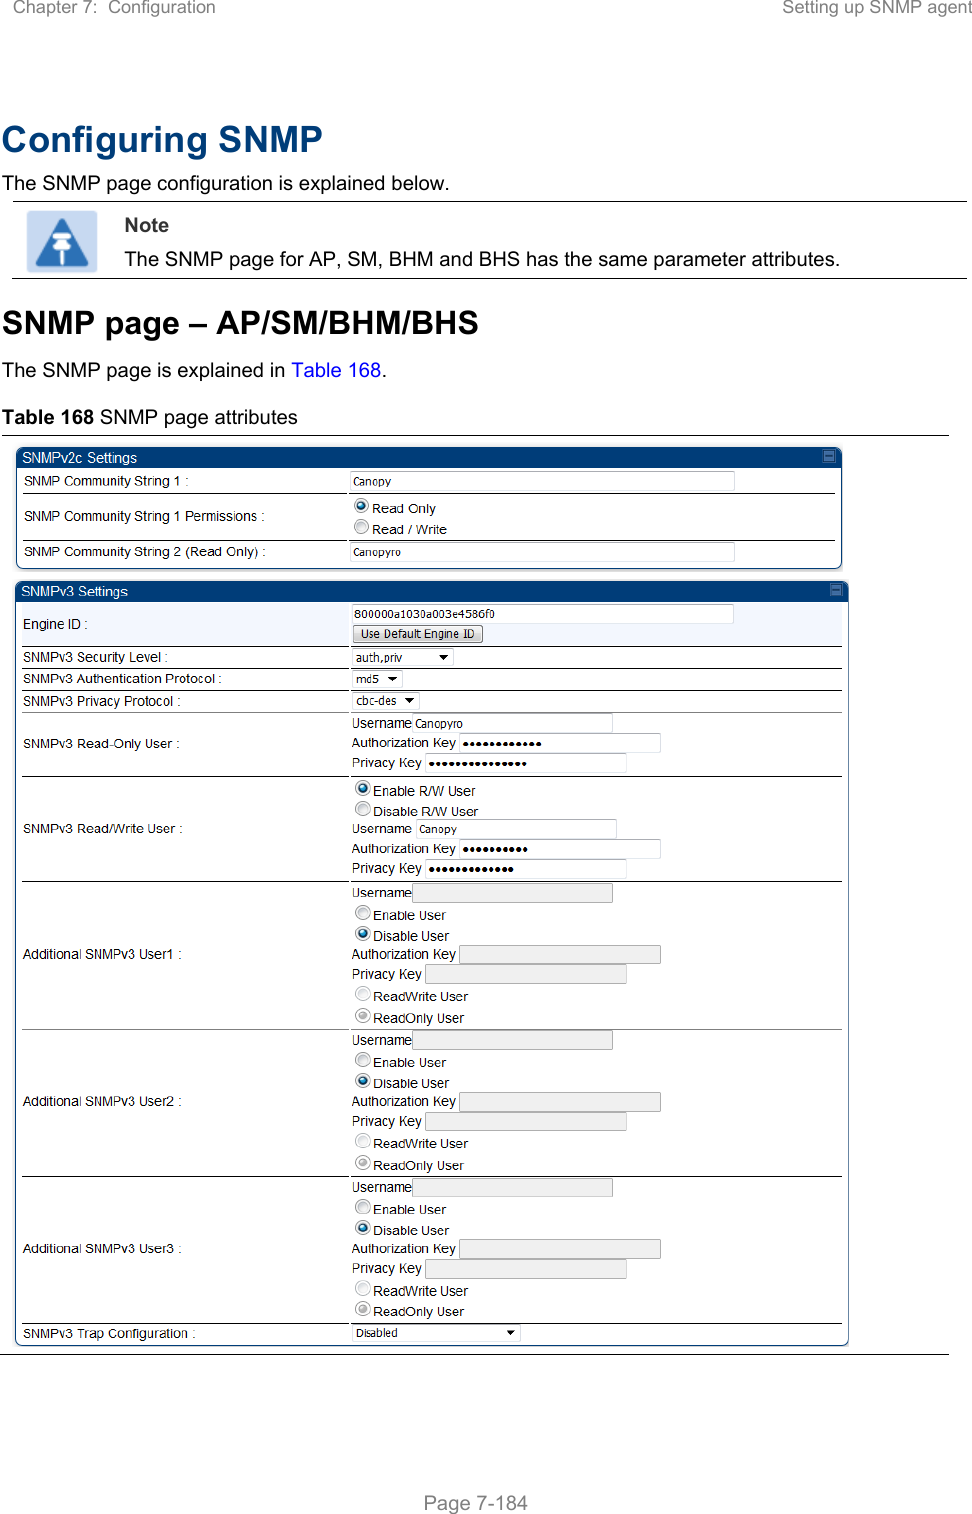 Chapter 7:  Configuration  Setting up SNMP agent   Page 7-184  Configuring SNMP The SNMP page configuration is explained below.  Note The SNMP page for AP, SM, BHM and BHS has the same parameter attributes. SNMP page – AP/SM/BHM/BHS The SNMP page is explained in Table 168. Table 168 SNMP page attributes   